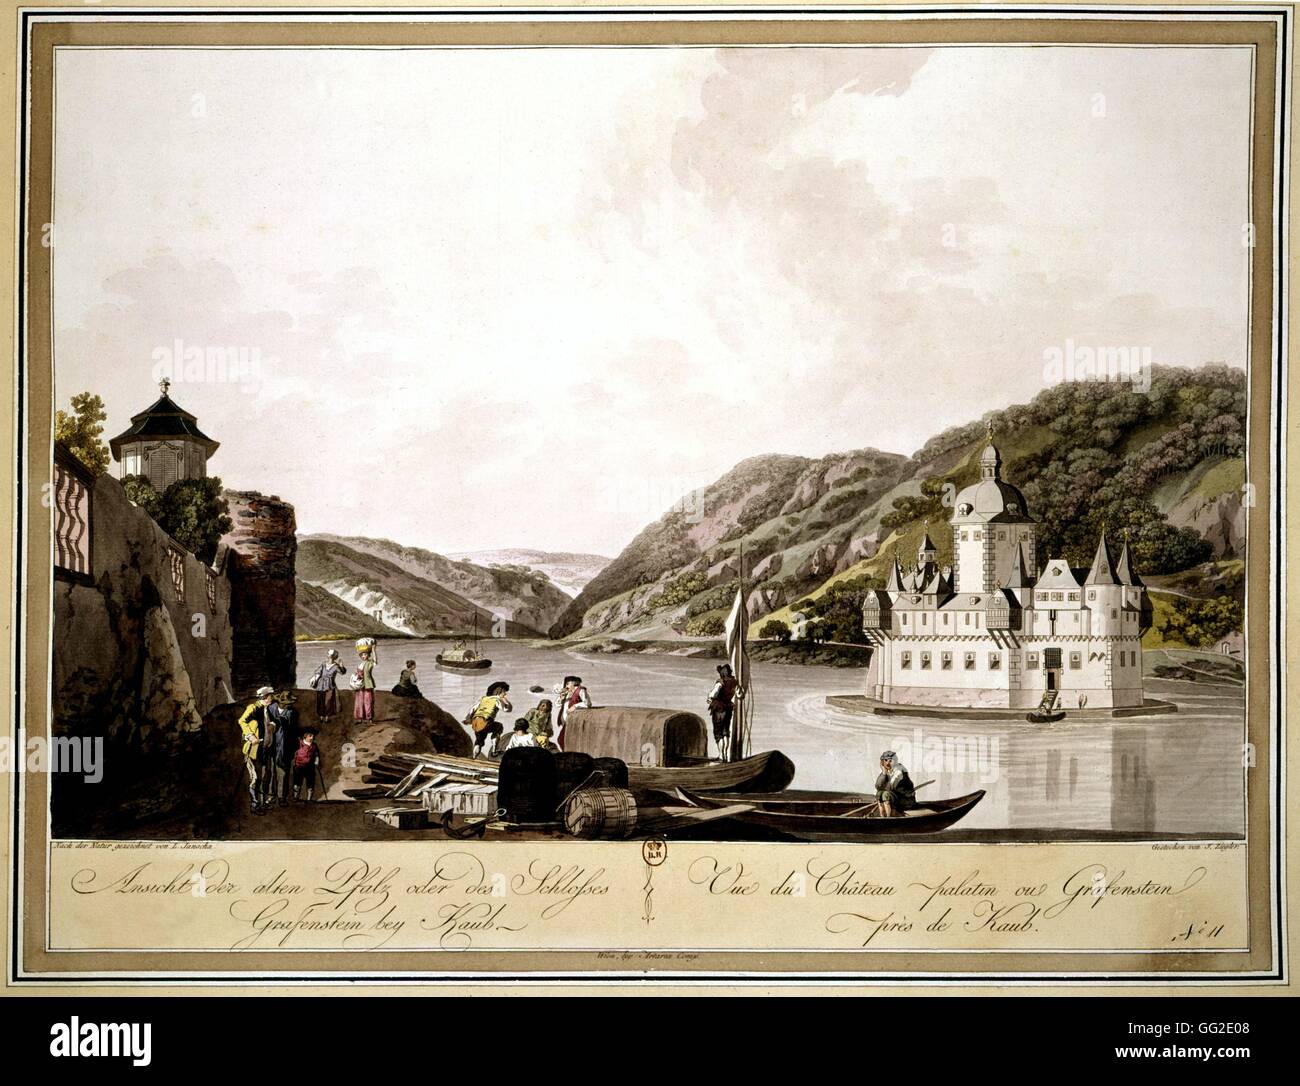 Janscha. View of the Palatine castle or Grafenstein on the Rhine river 1800 Germany Stock Photo